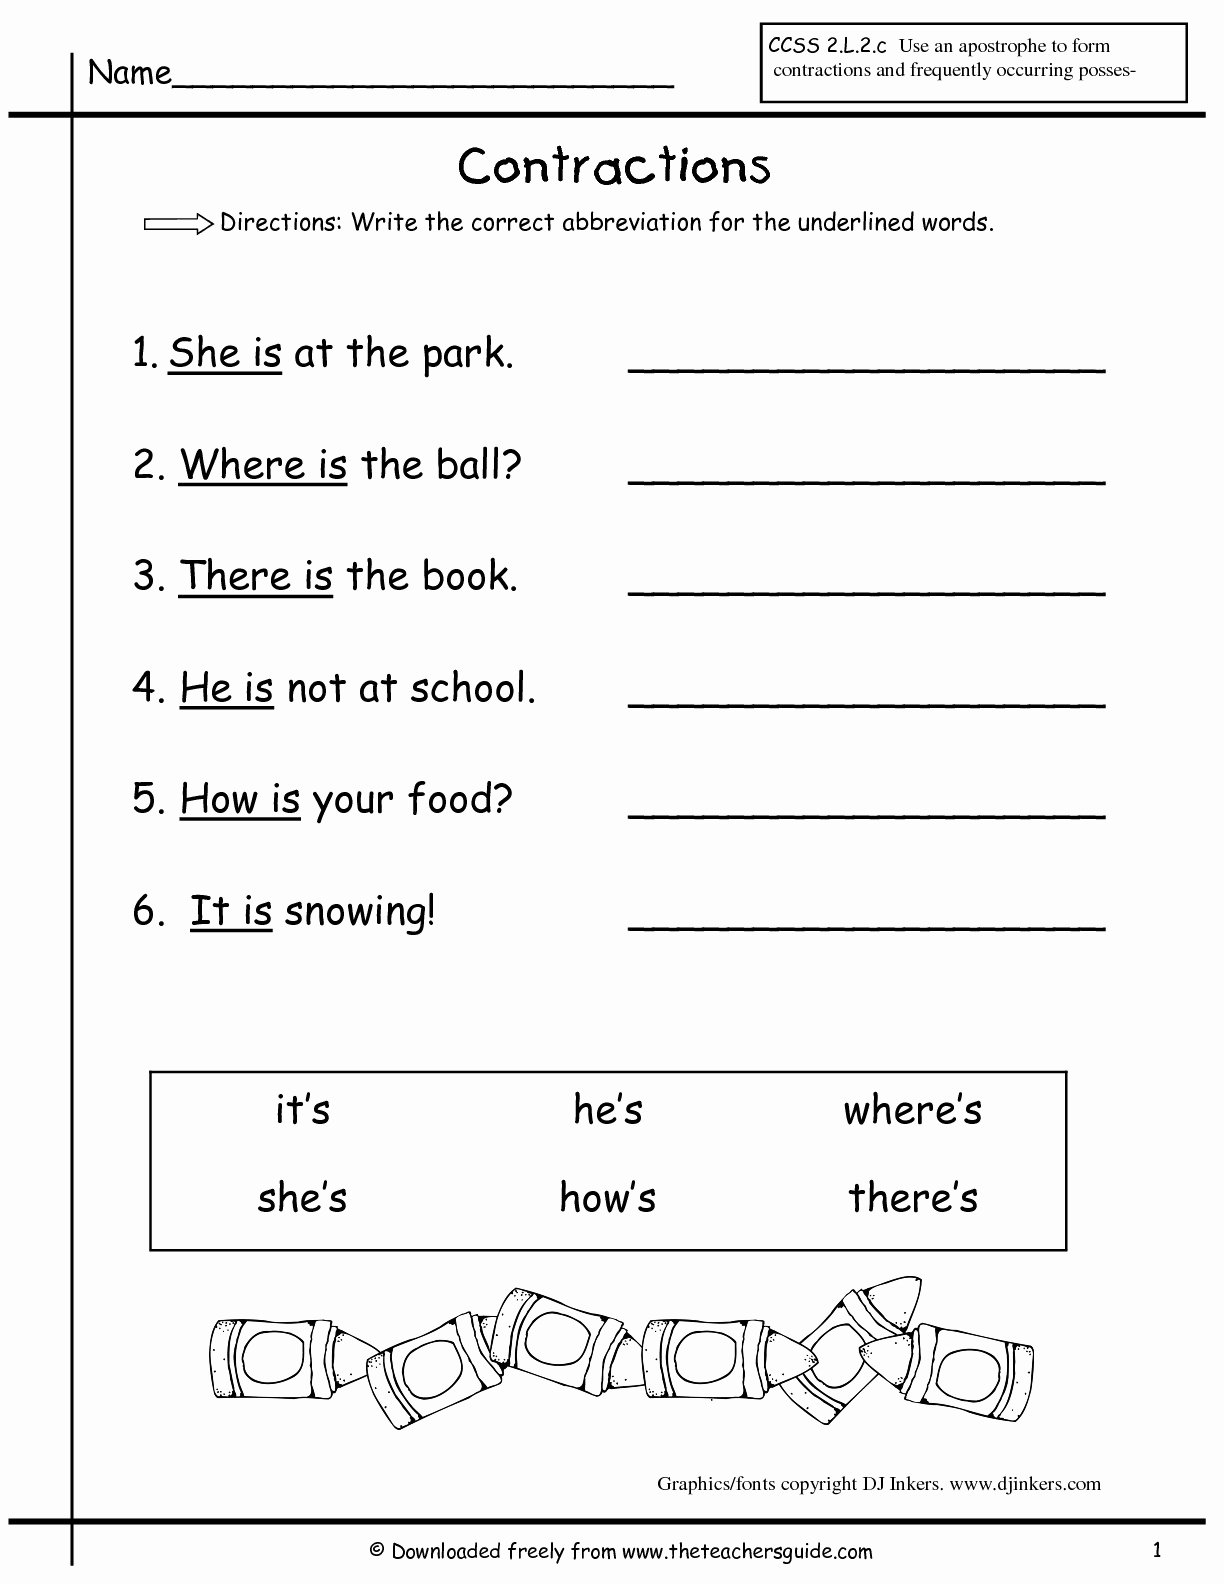 60+ Interactive Contractions Worksheets 3Rd Grade 58